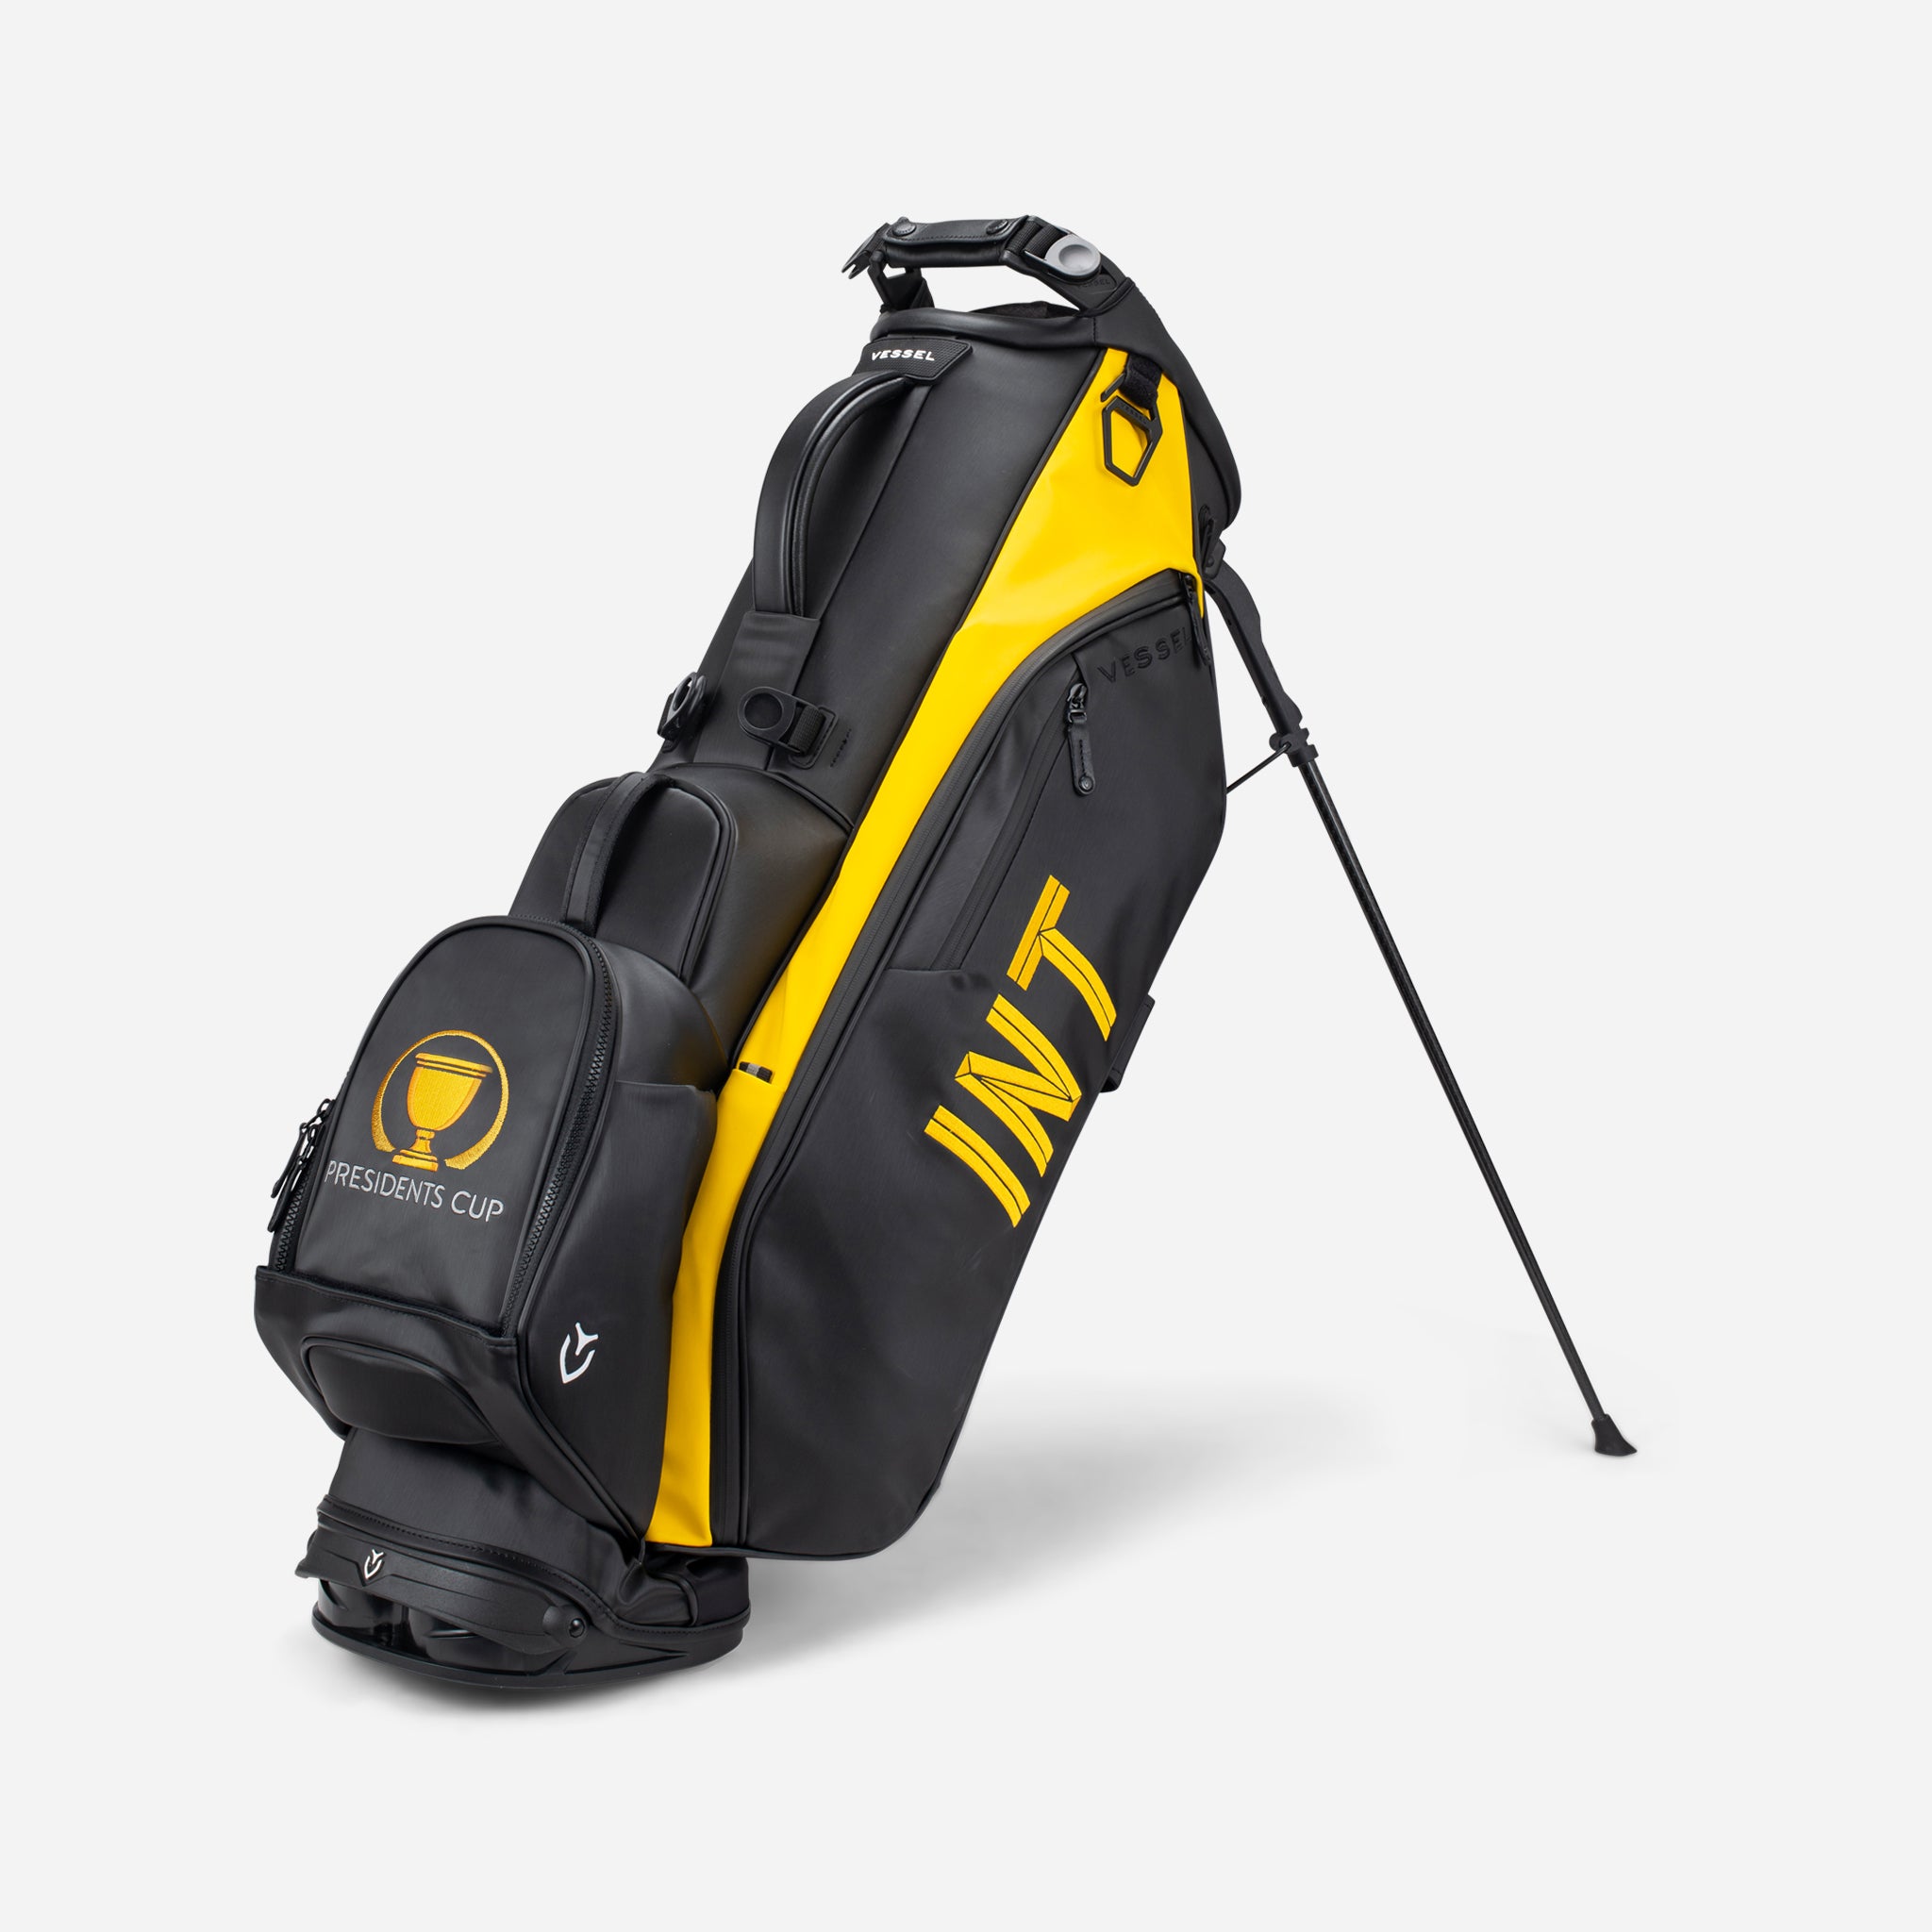 2022 Presidents Cup International Stand Bag